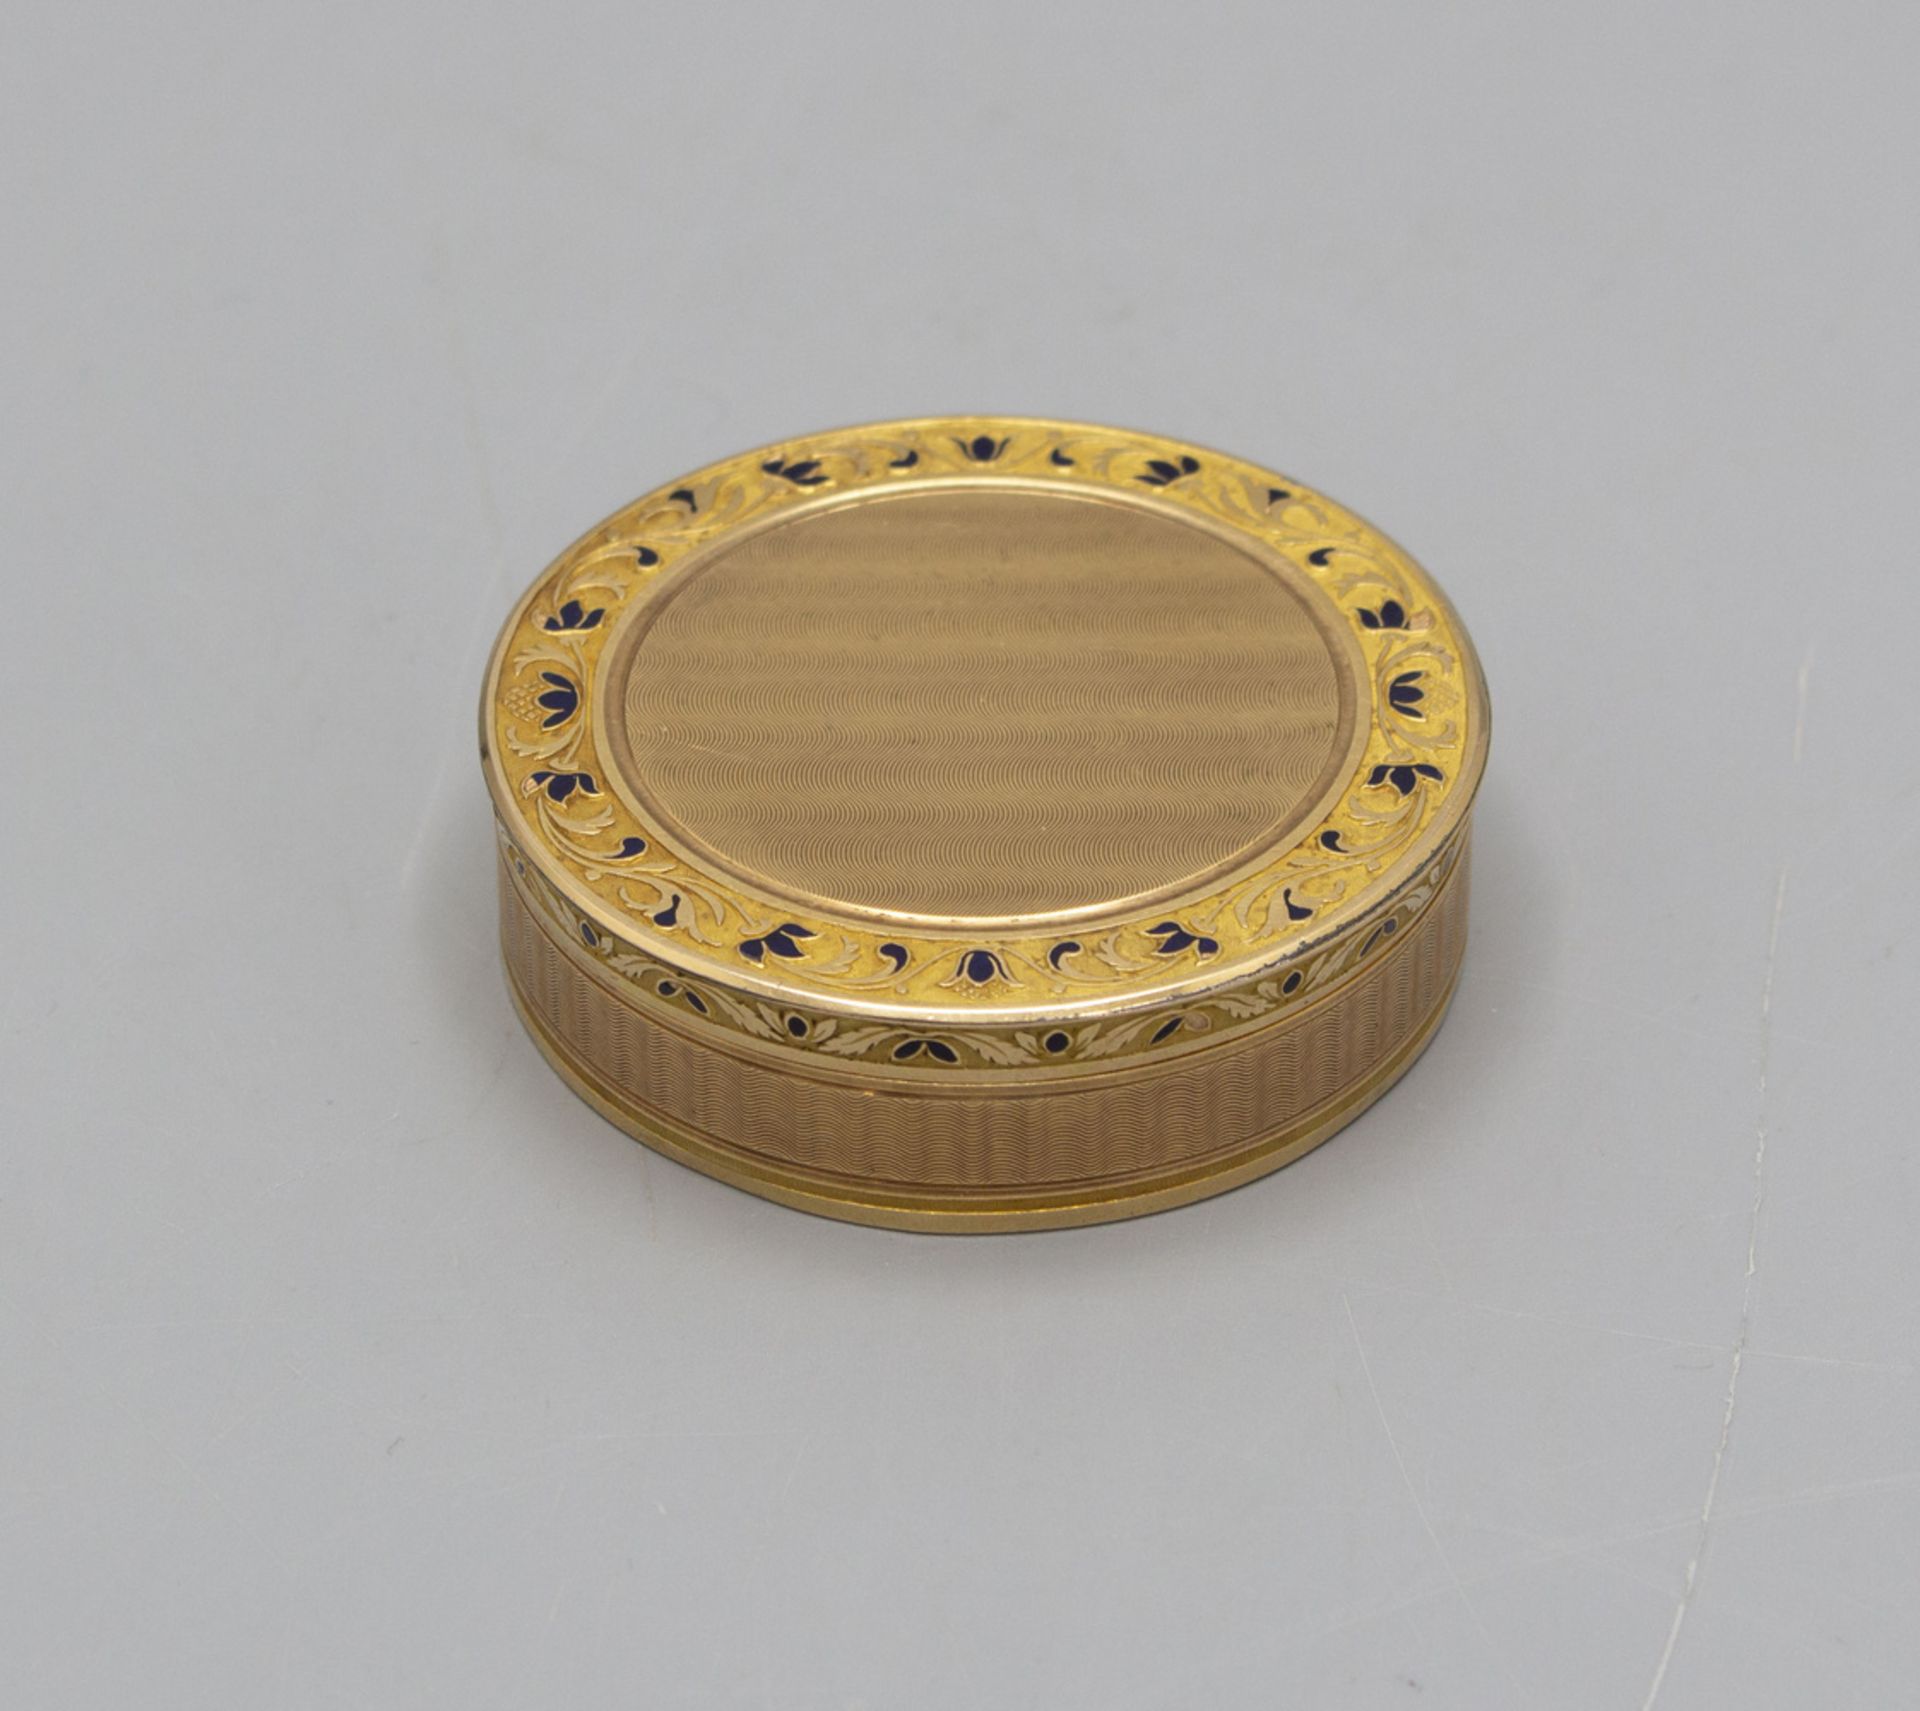 Gold Tabatiere / An 18 ct gold snuff box, Frankreich, um 1800 - Image 4 of 8